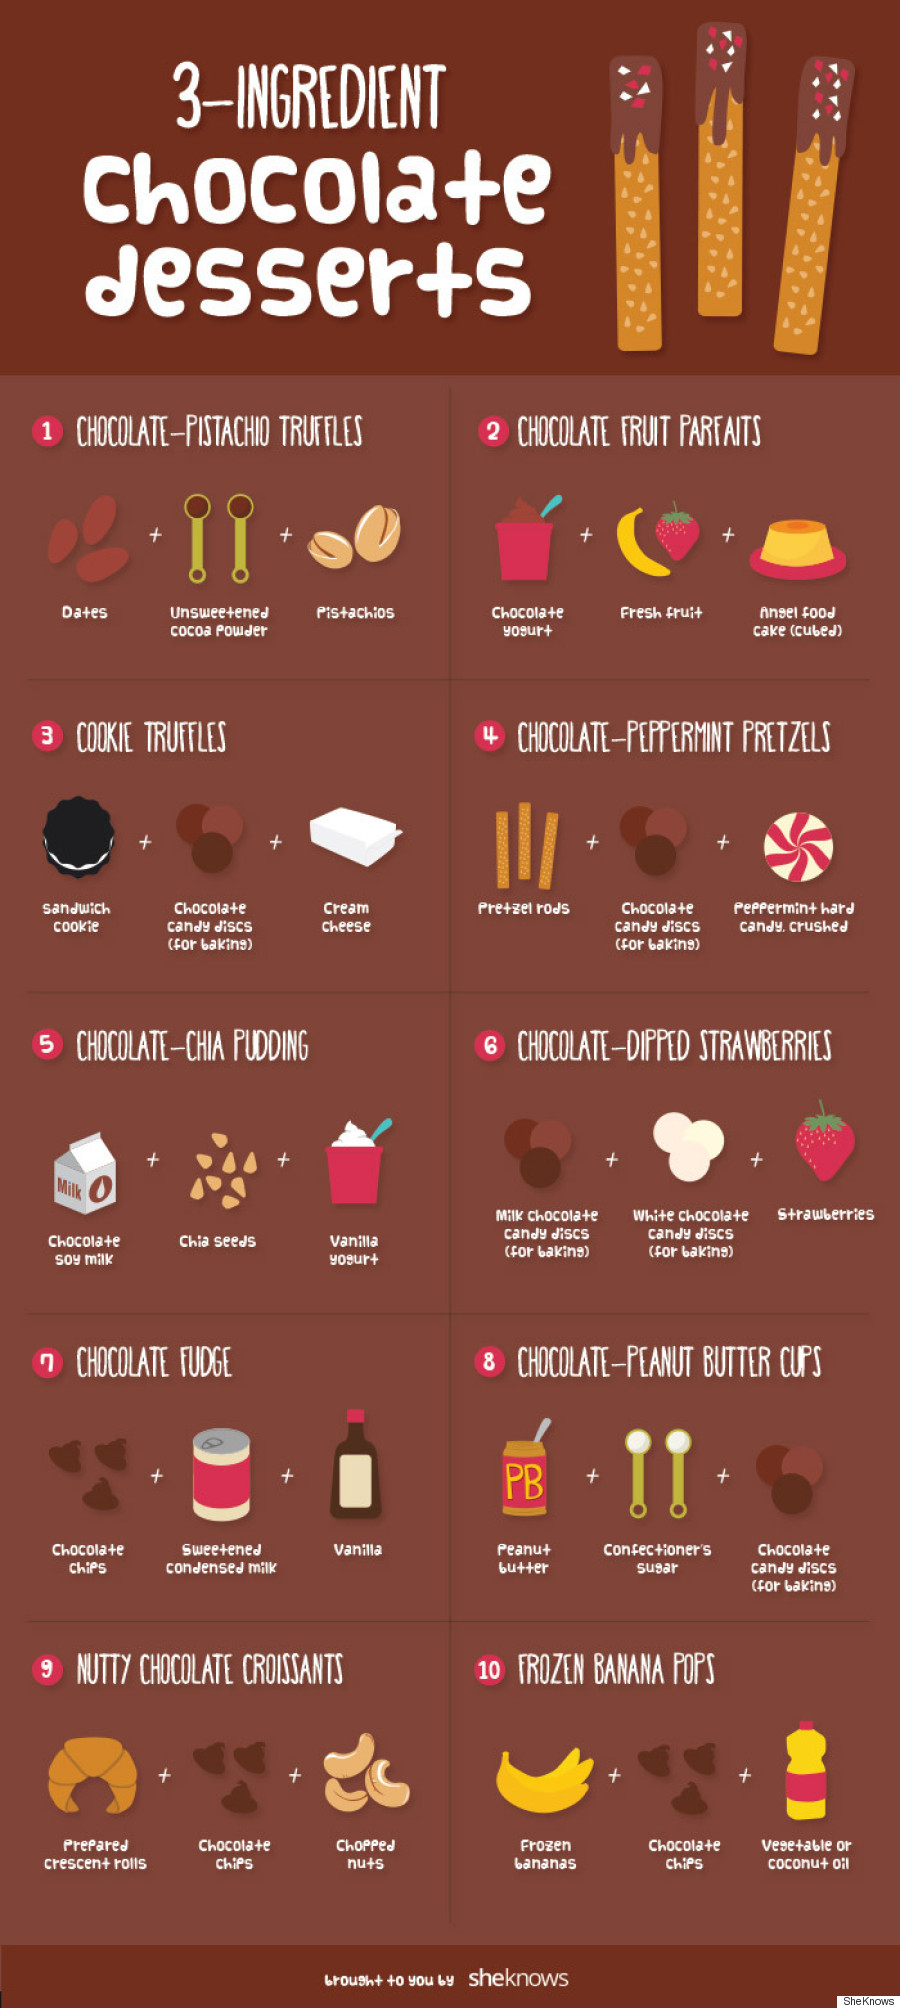 What are the main ingredients in chocolate?